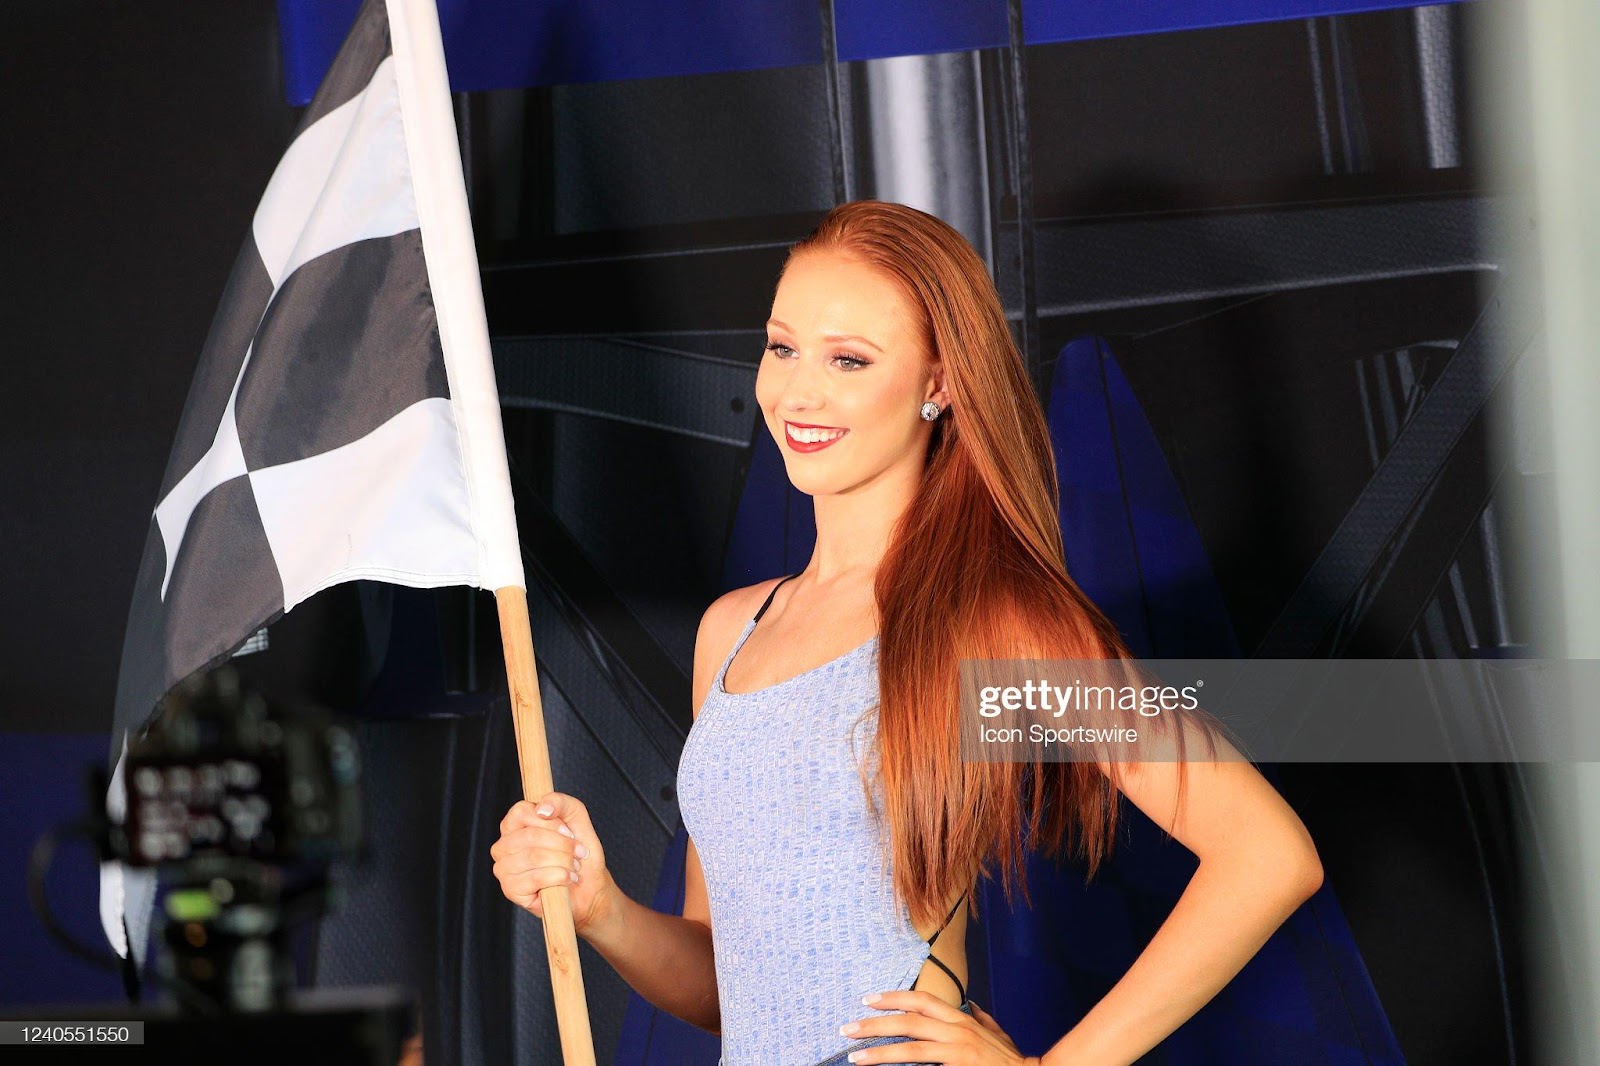 D:\Documenti\posts\posts\Miami\New folder\donne\female-fan-poses-with-a-checkered-flag-during-the-first-running-of-picture-id1240551550.jpg